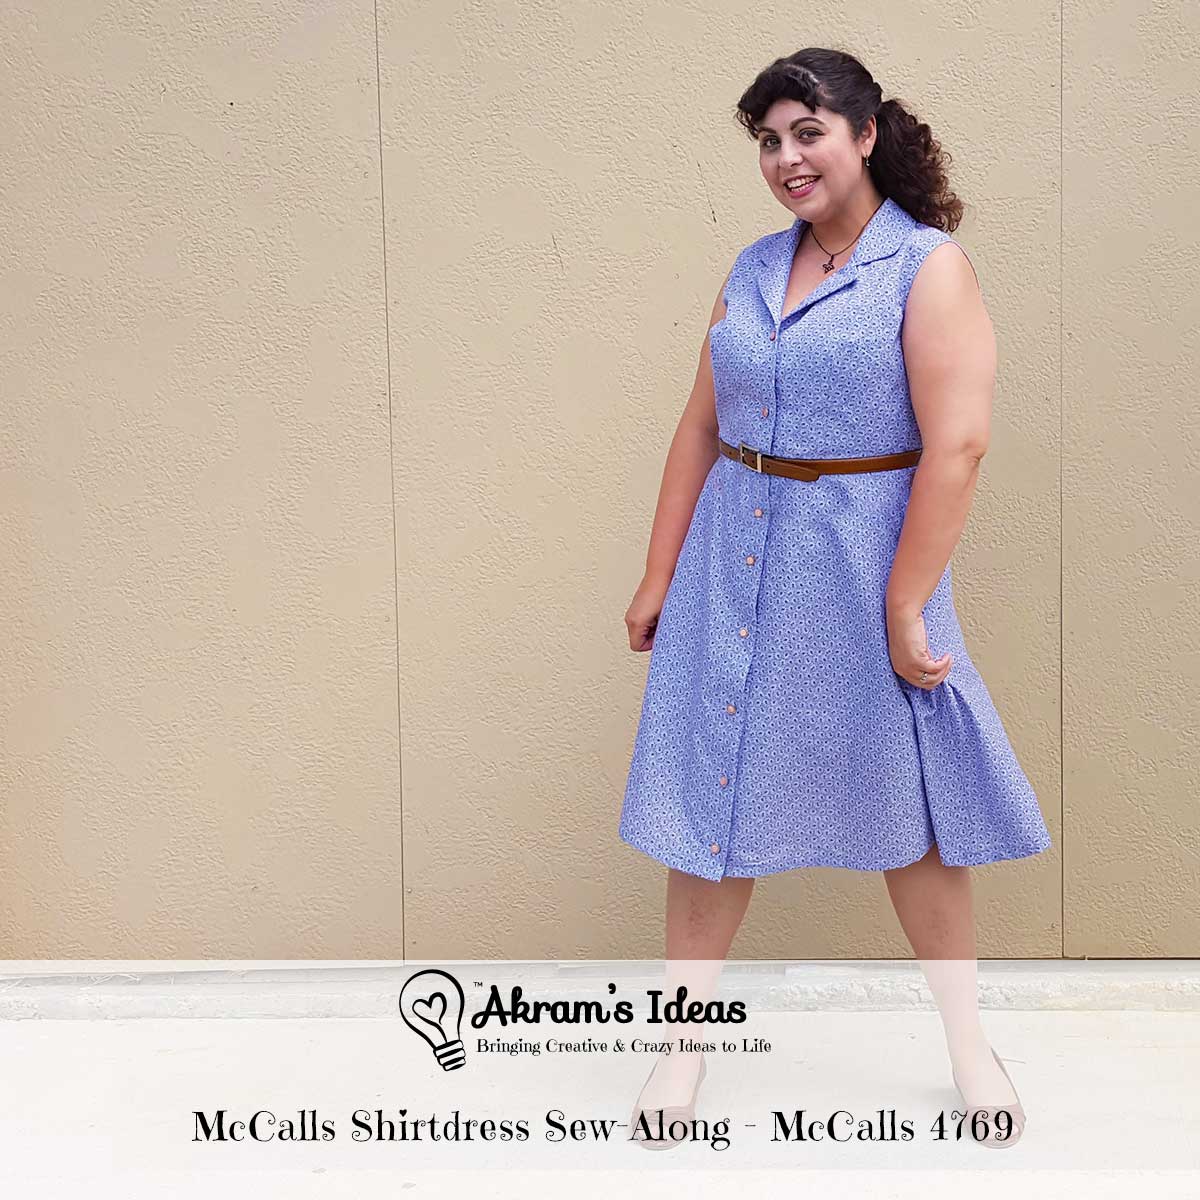 A review of McCalls 4769 shirtdress pattern for the McCalls Shirtdress Sew-Along #shirtdresssewalong.